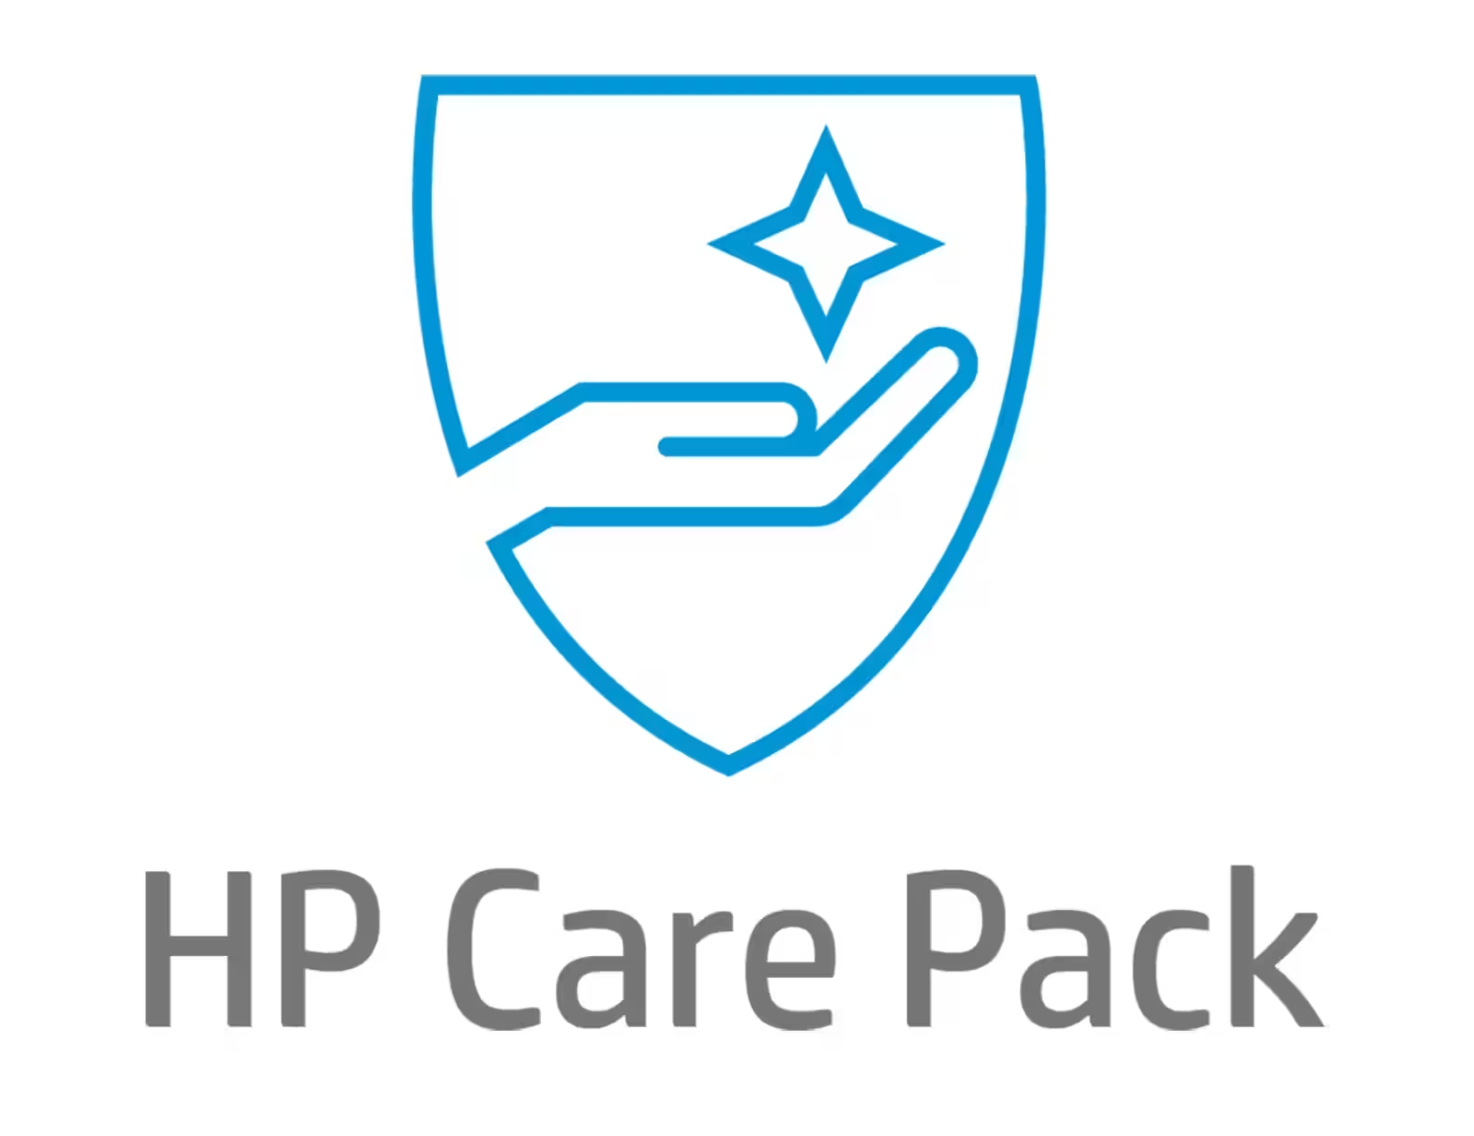 Bild von HP Electronic HP Care Pack Software Technical Support